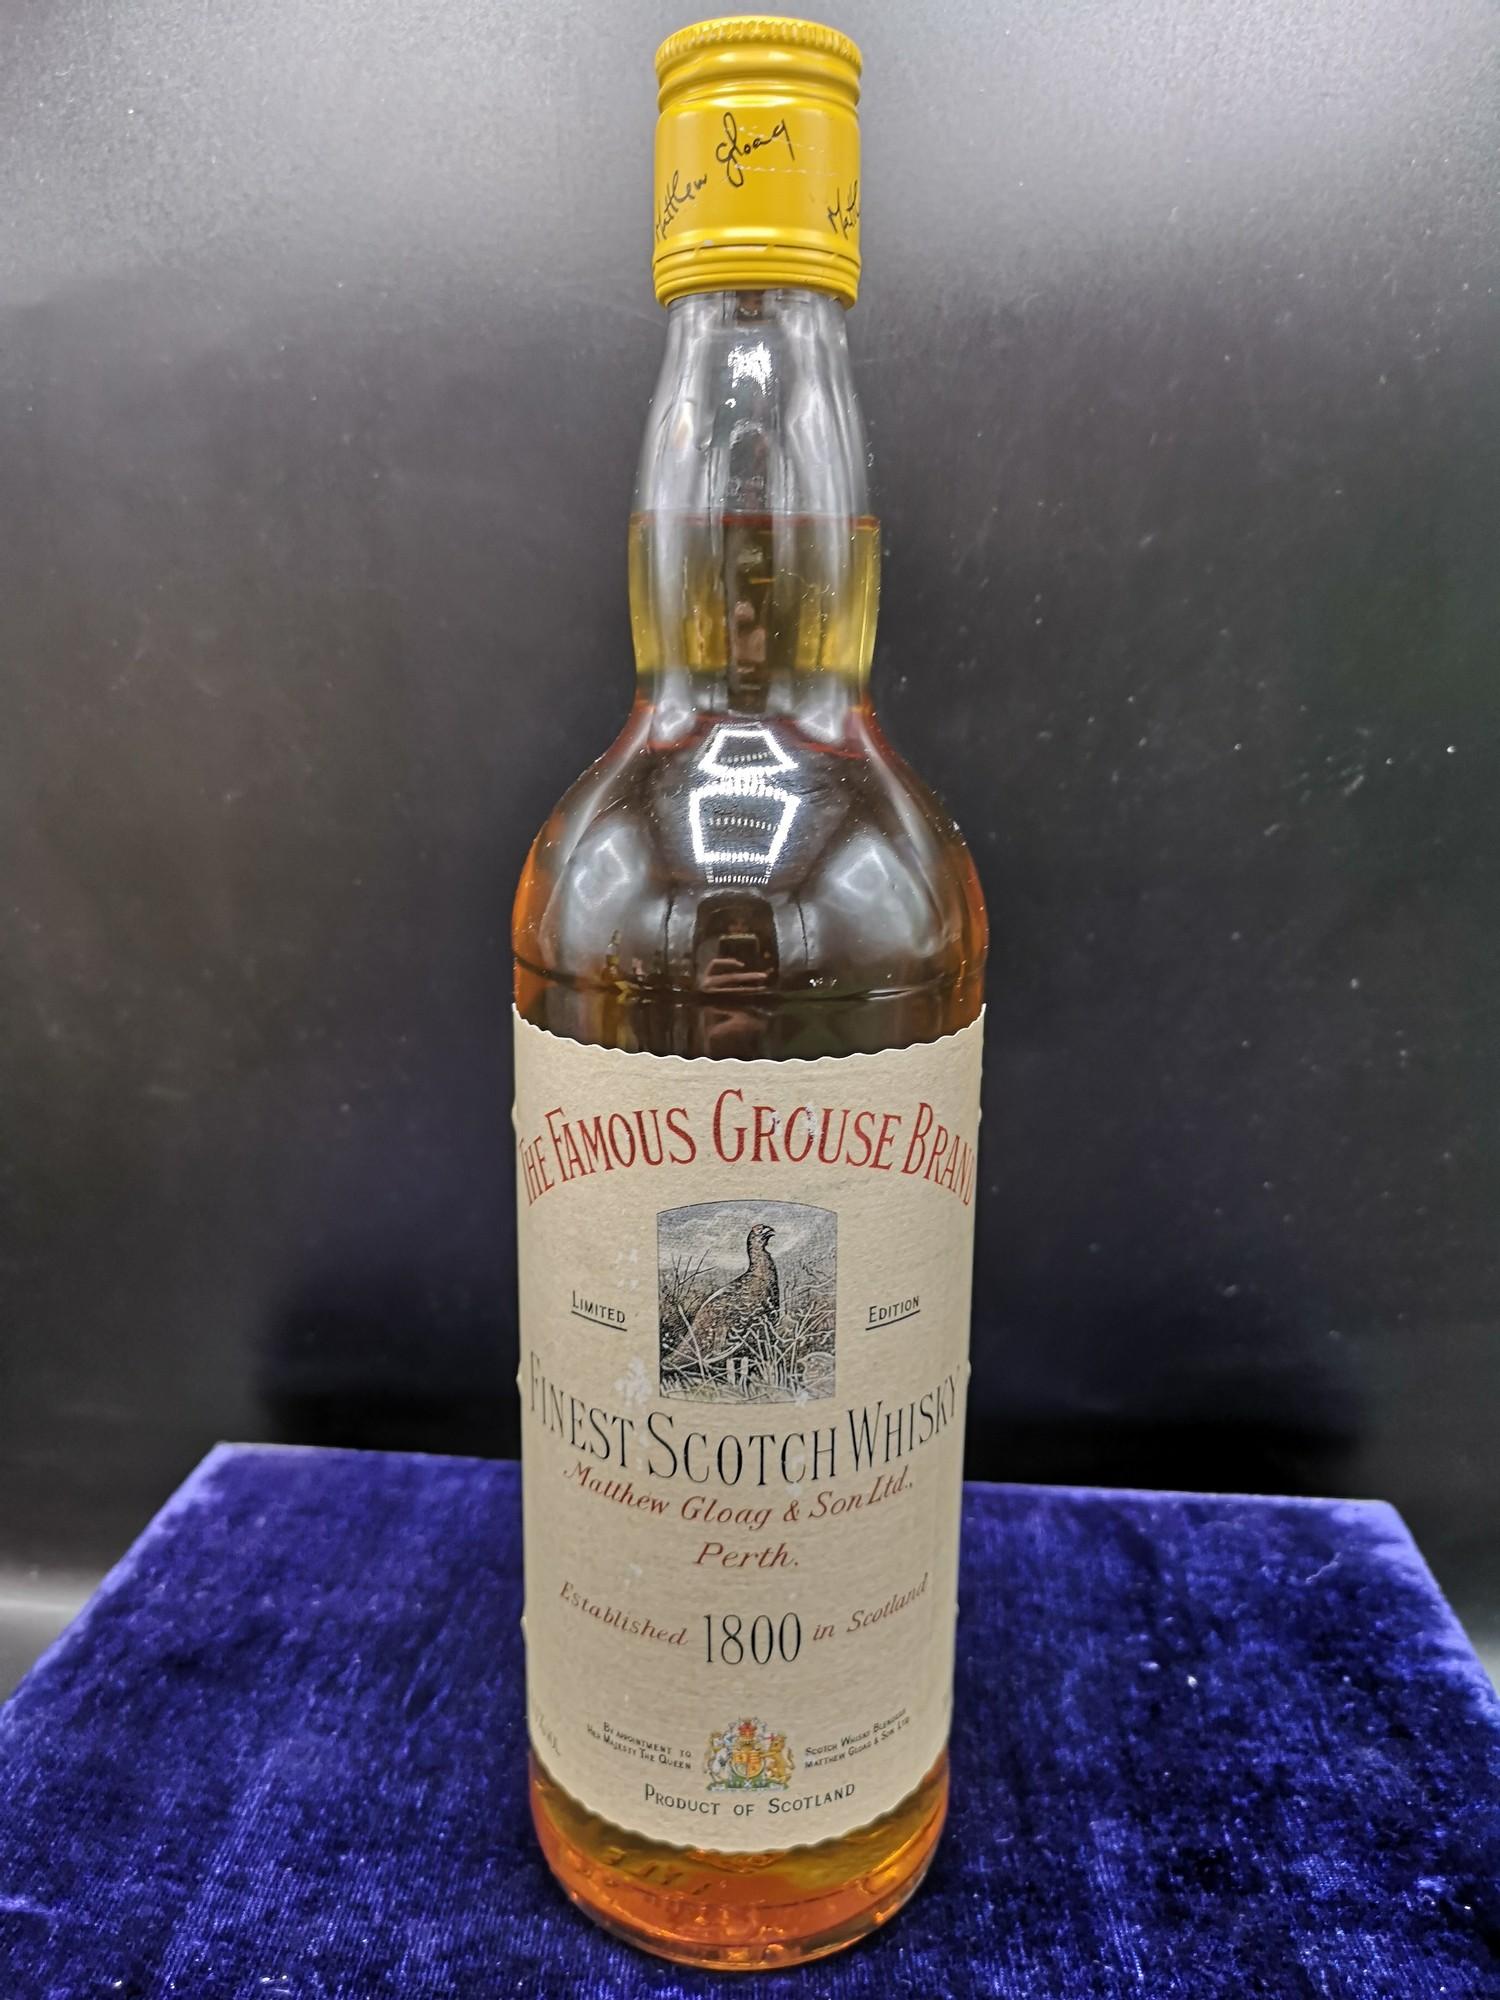 70cl Matthew gloag and sons limited Perth the famous grouse bray whisky full and sealed